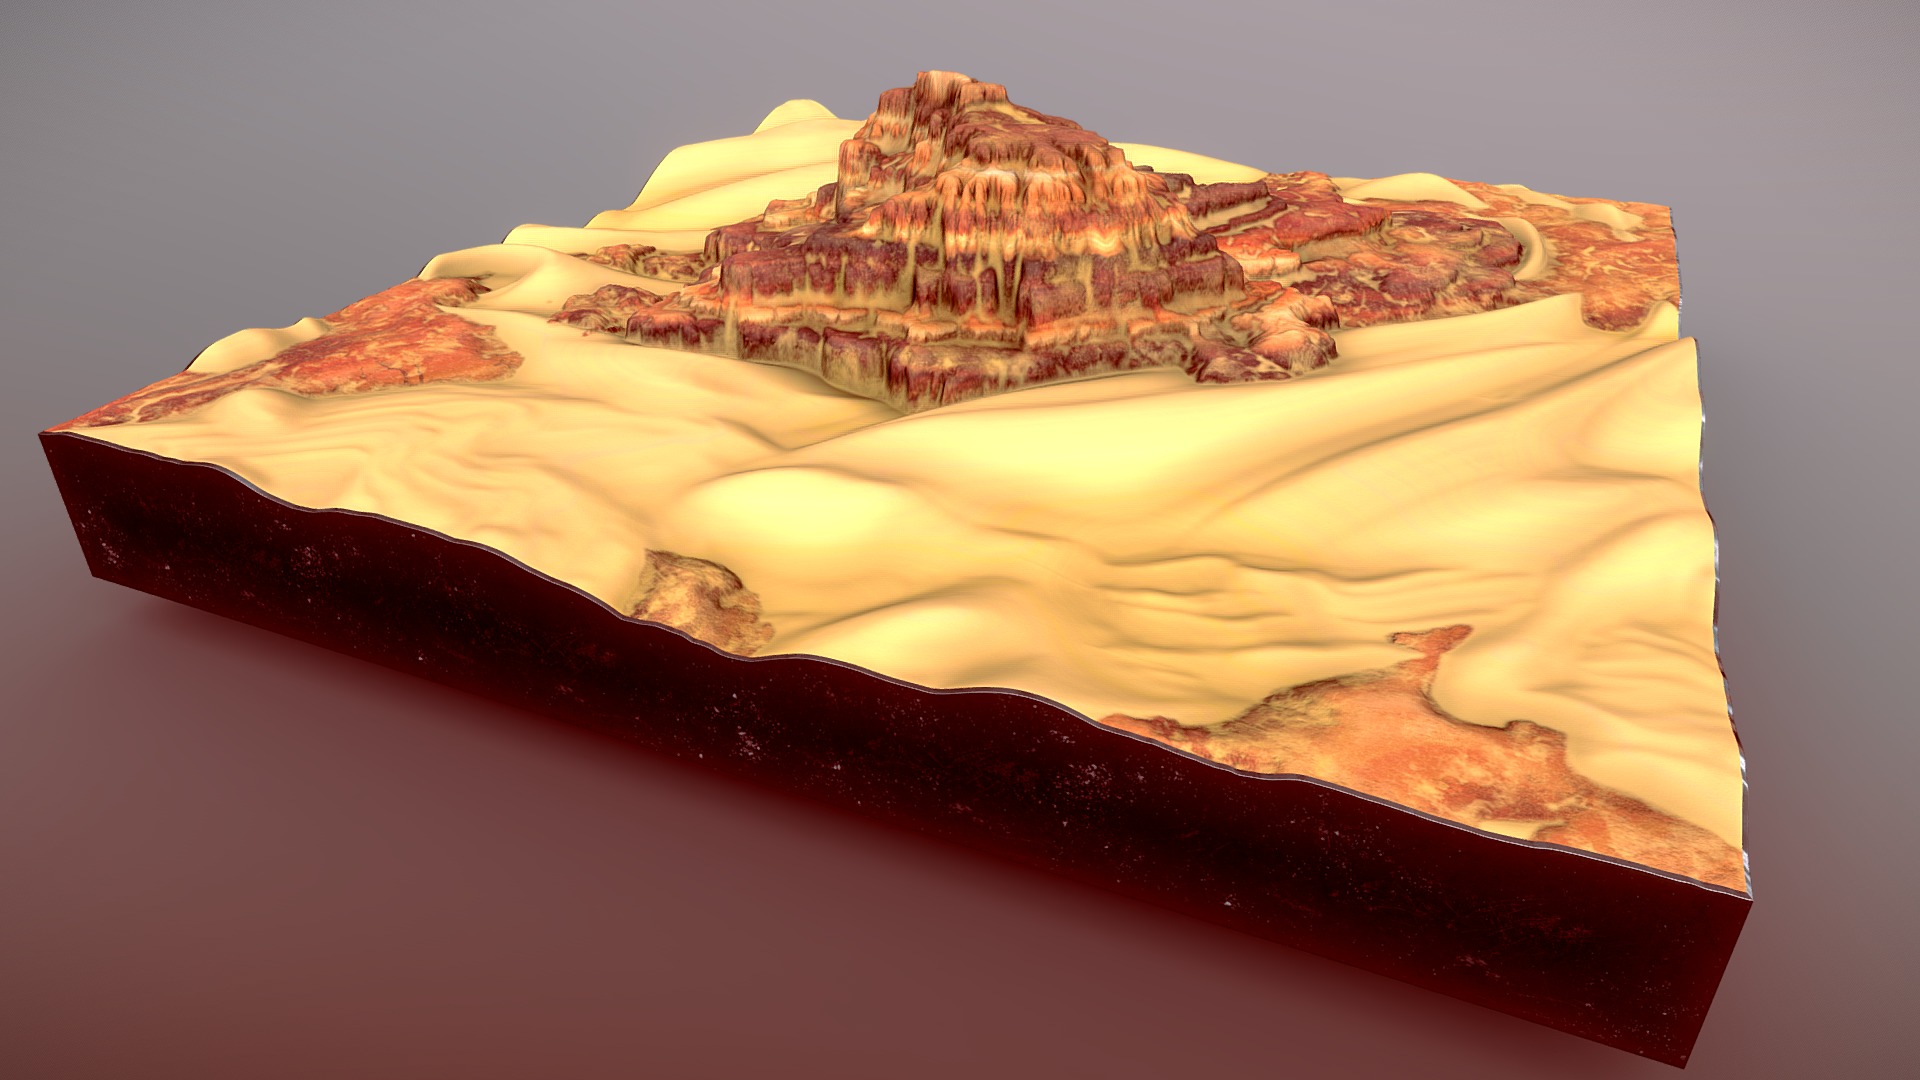 3D model Sandy Terrace Mountain - This is a 3D model of the Sandy Terrace Mountain. The 3D model is about a piece of wood with a brown substance on it.